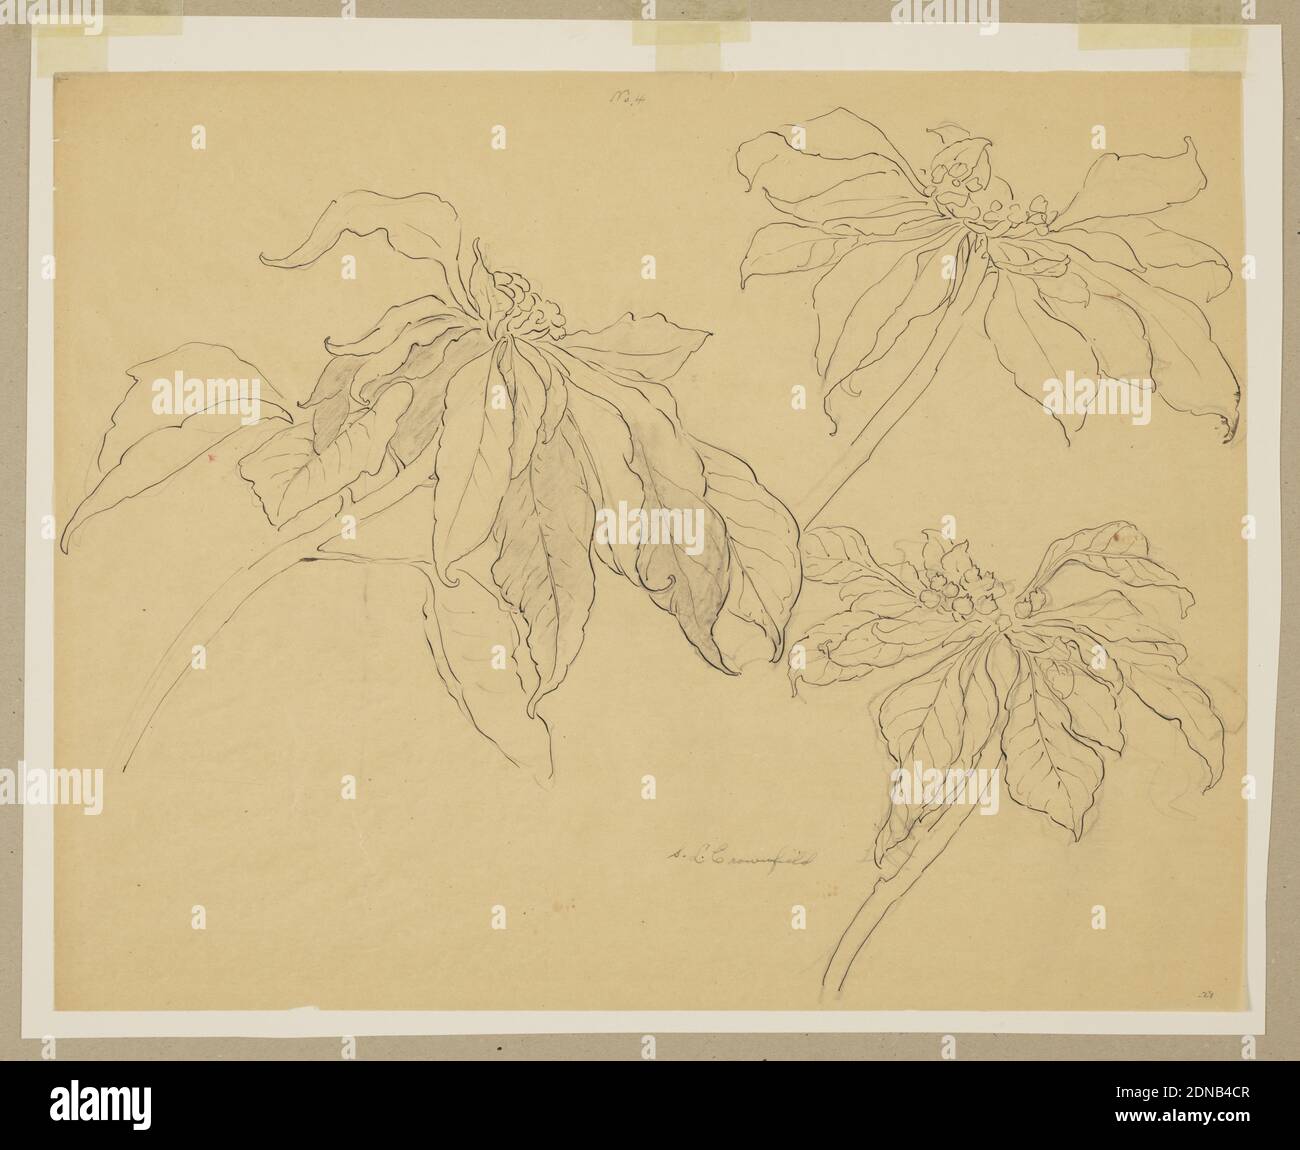 Study of Poinsettias, Sophia L. Crownfield, (American, 1862–1929), Graphite, pen and ink on tracing paper, Horizontal sheet with three studies of poinsettias., USA, early 20th century, nature studies, Drawing Stock Photo